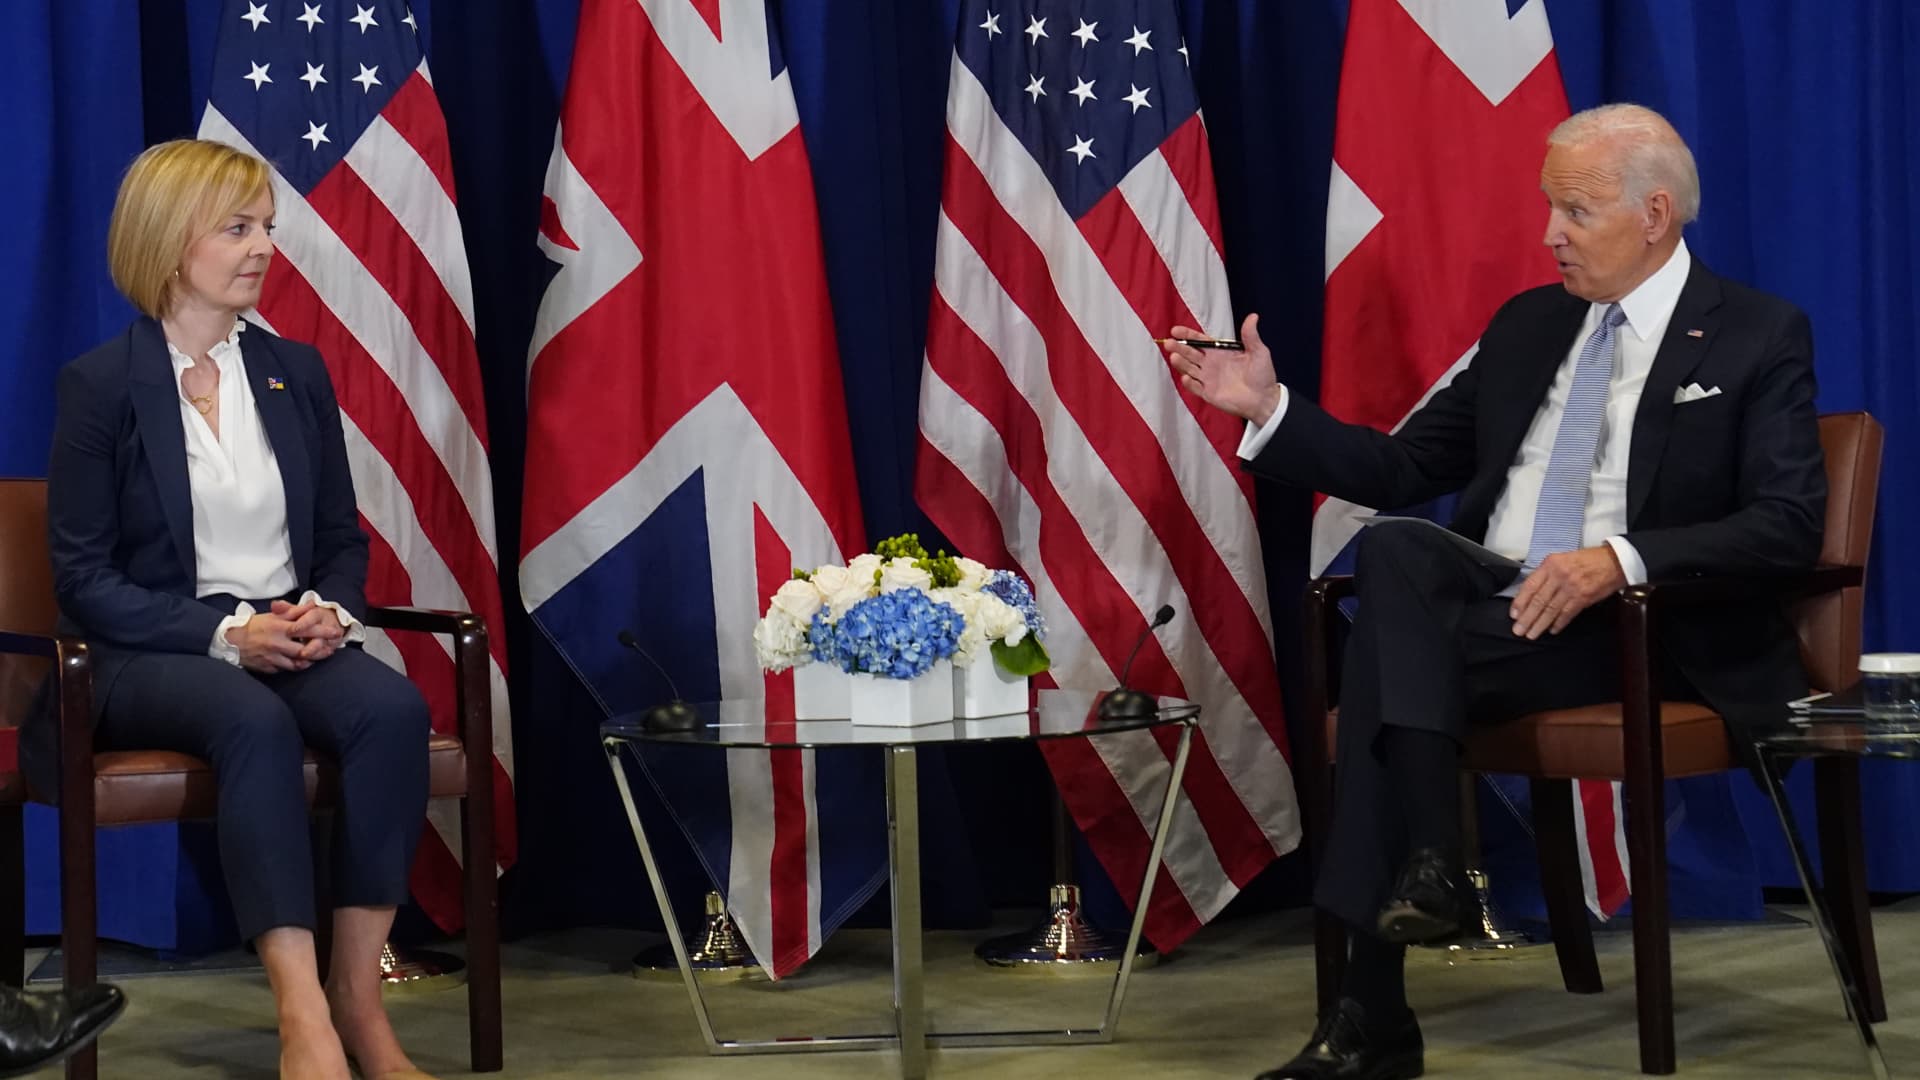 Britain pursues ‘trickle-down economics’ despite scorn from Biden. And the stakes are sky-high